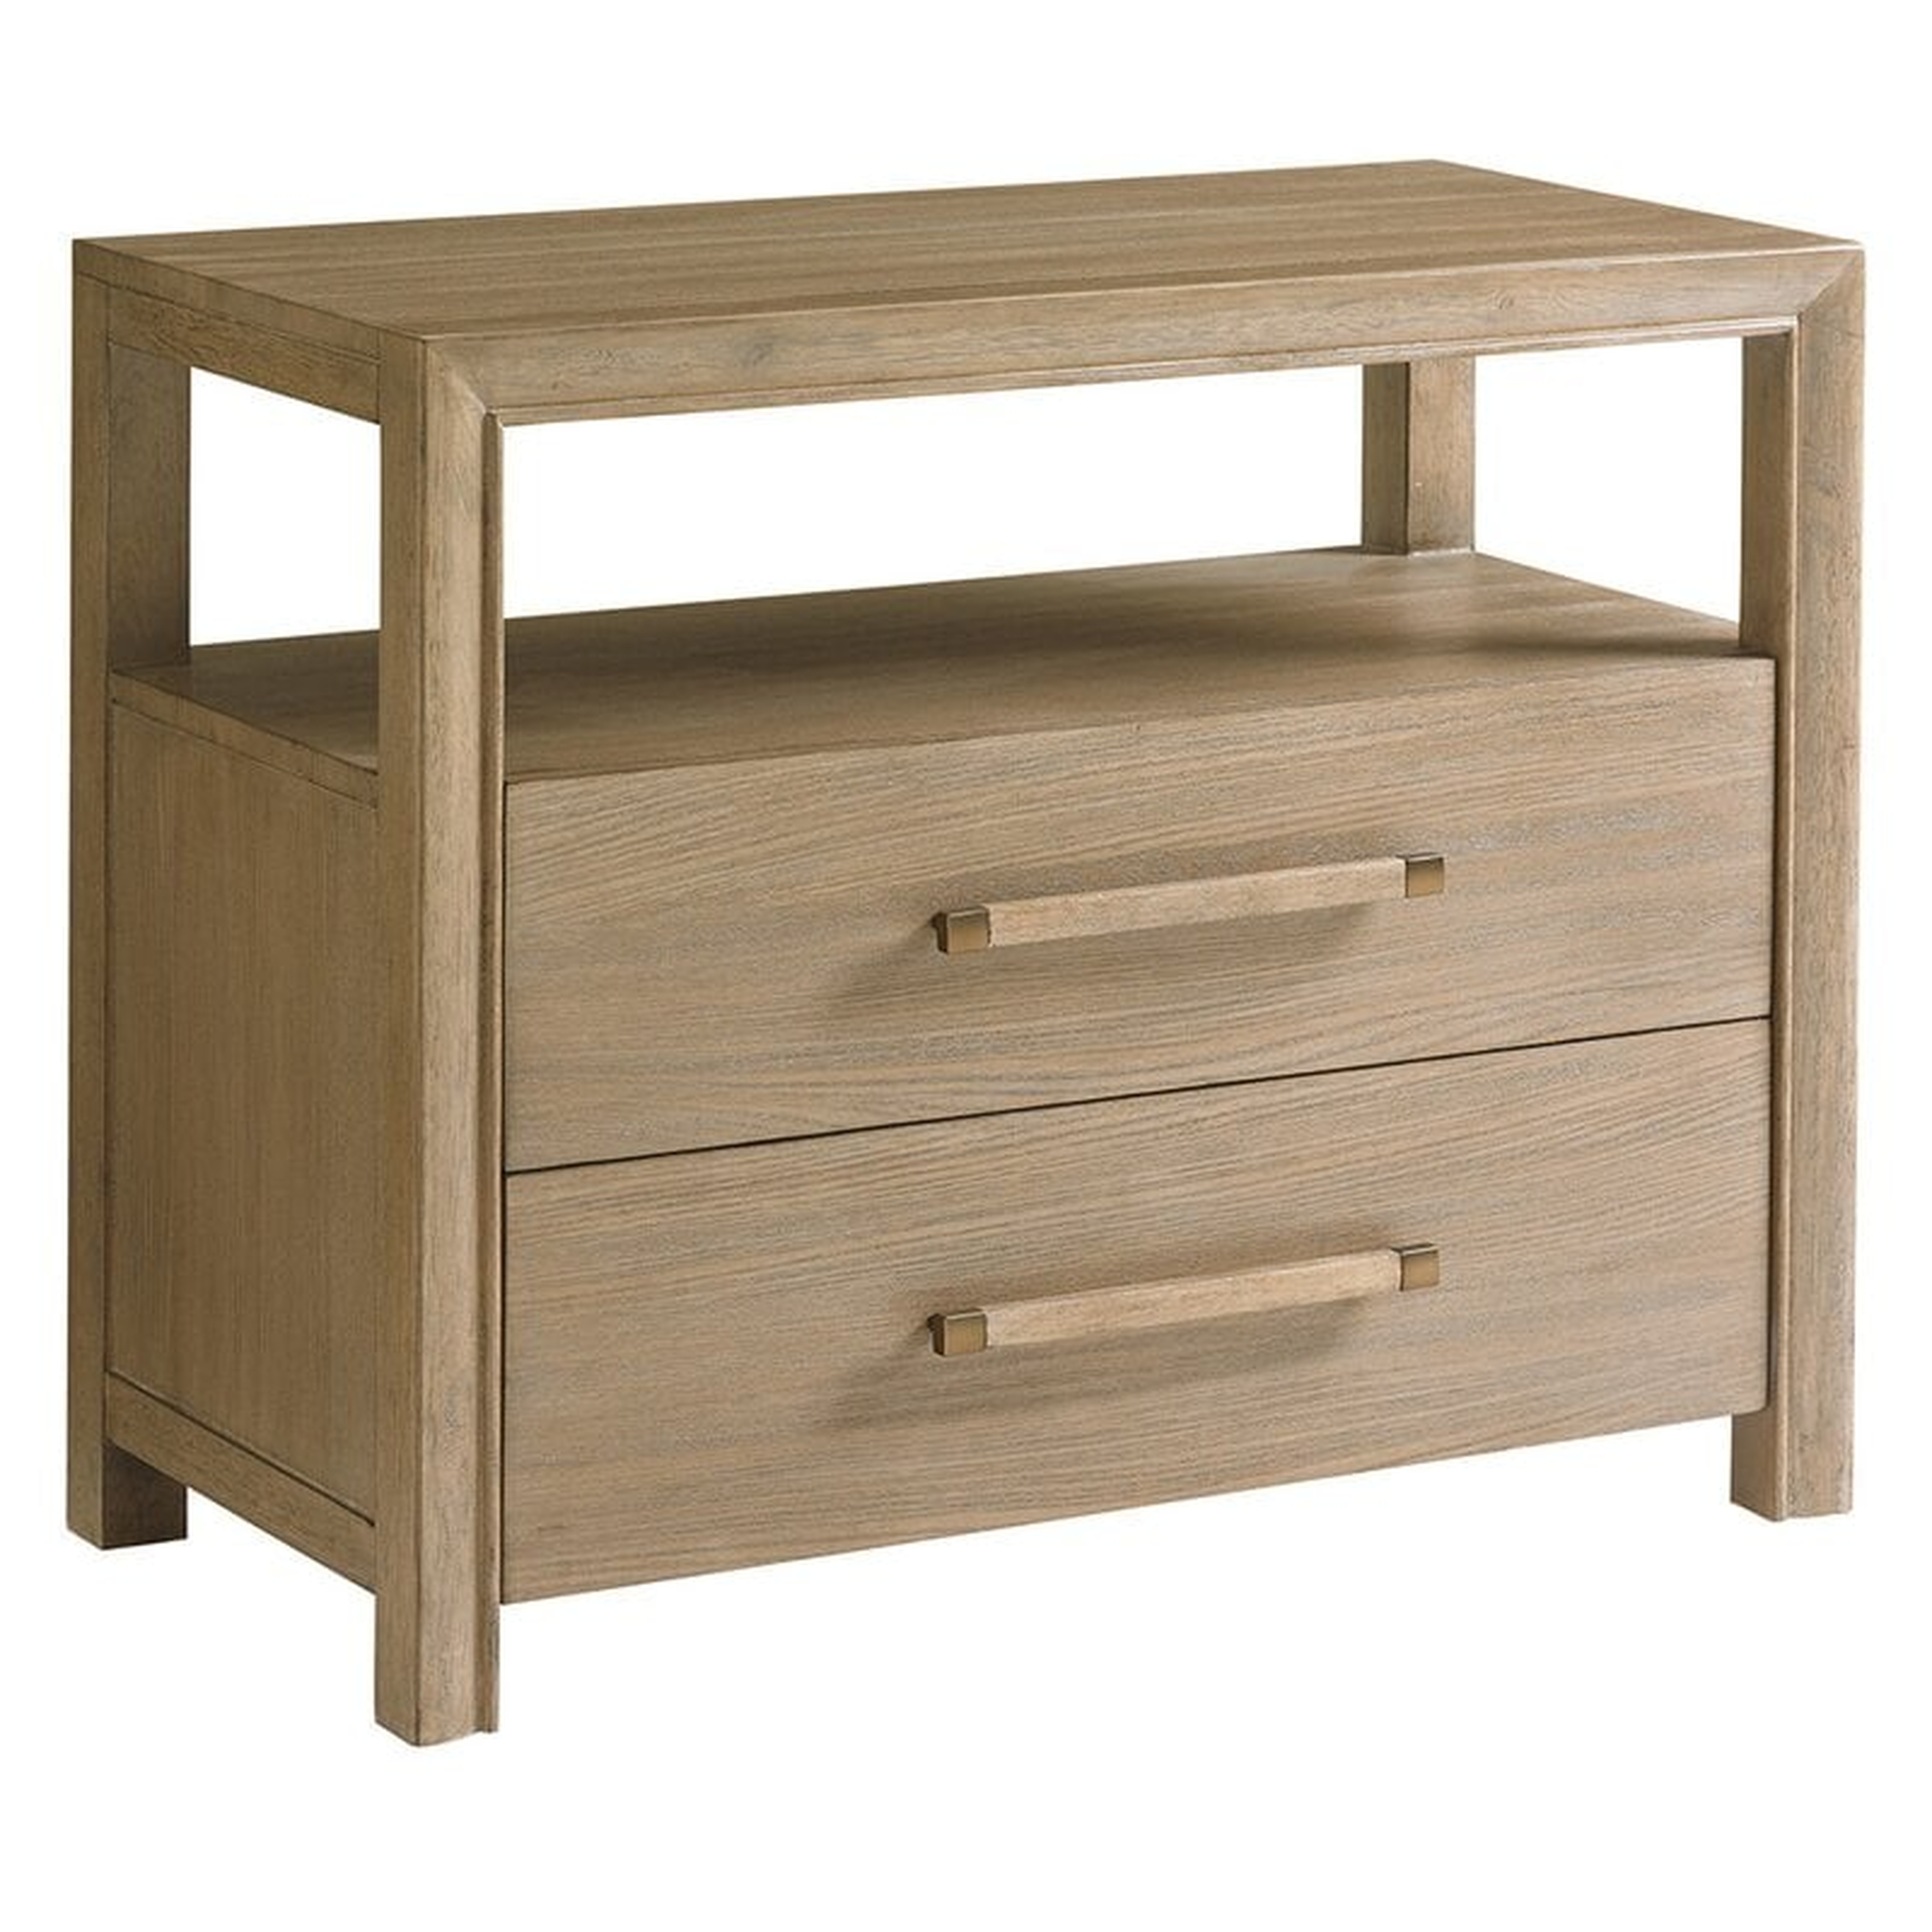 Shadow Play Curtain Call 2 Drawer Nightstand - Perigold